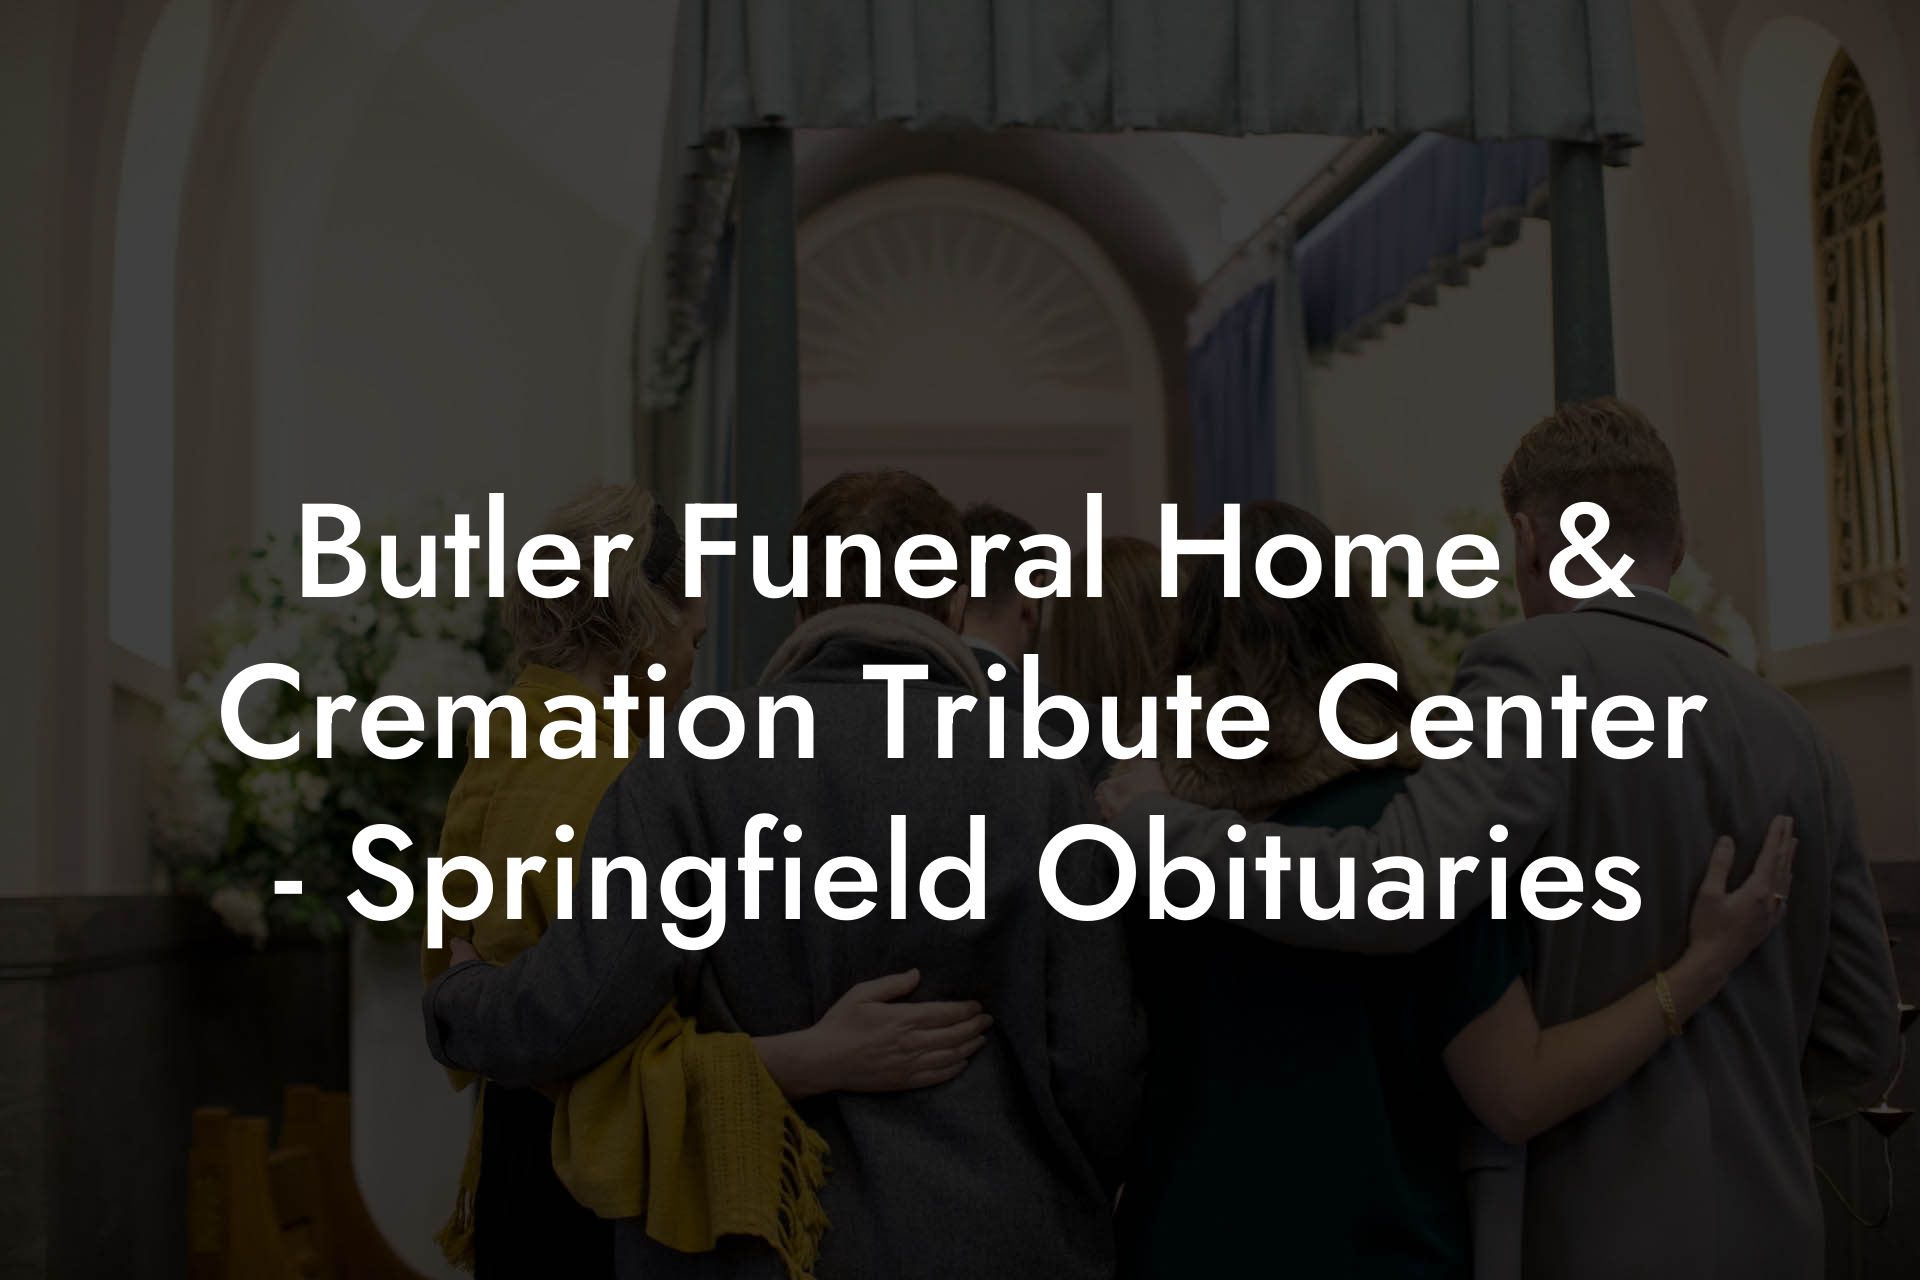 Butler Funeral Home & Cremation Tribute Center - Springfield Obituaries